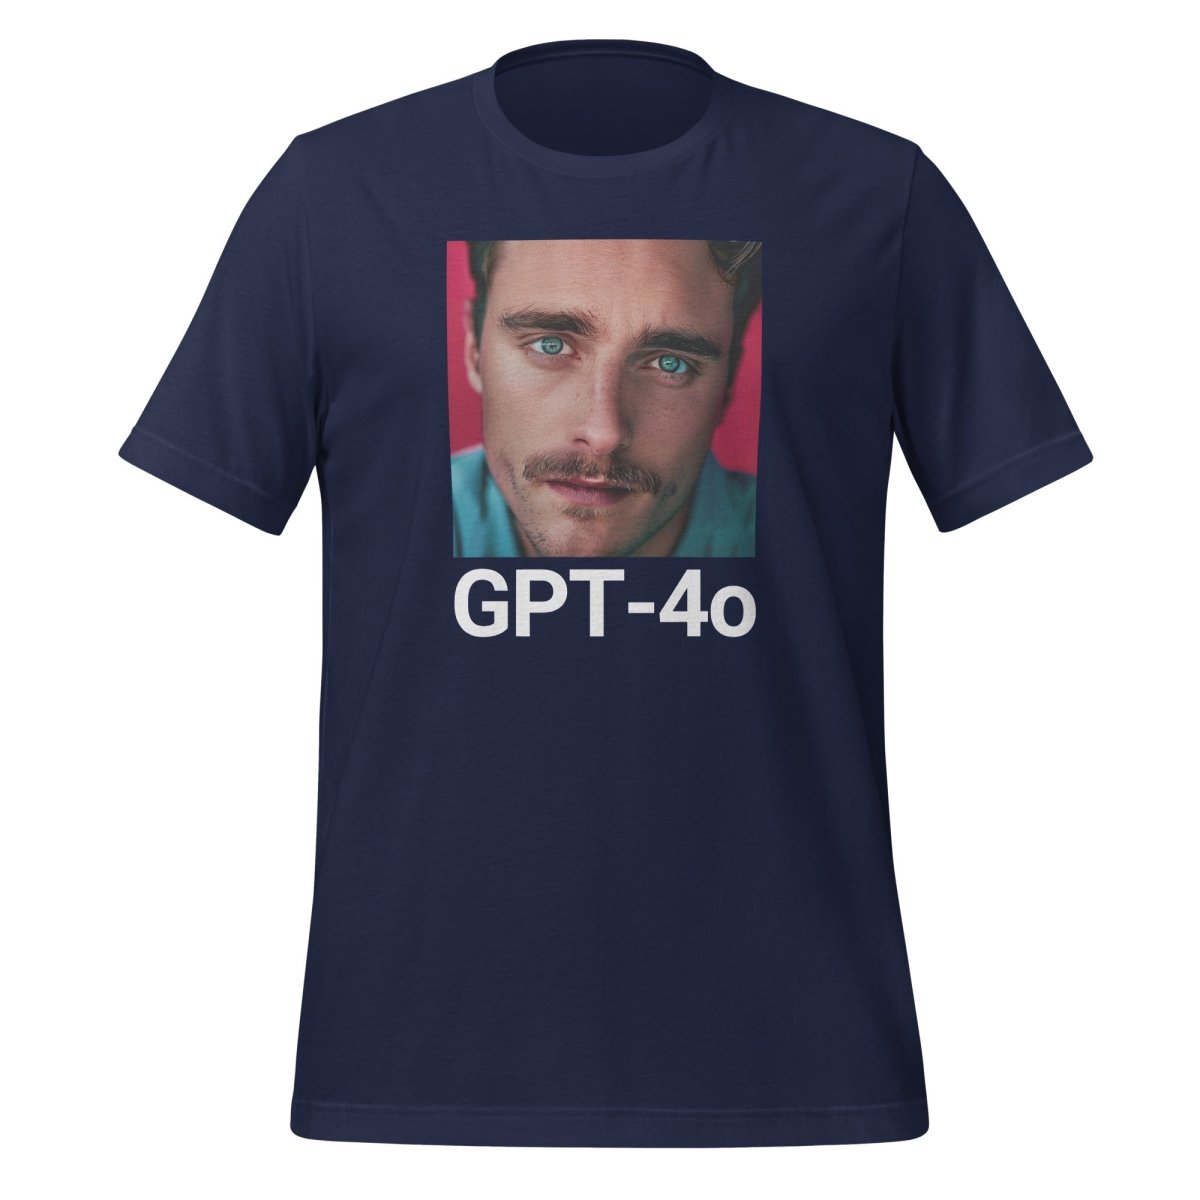 GPT - 4o is Her T - Shirt (unisex) - Navy - AI Store